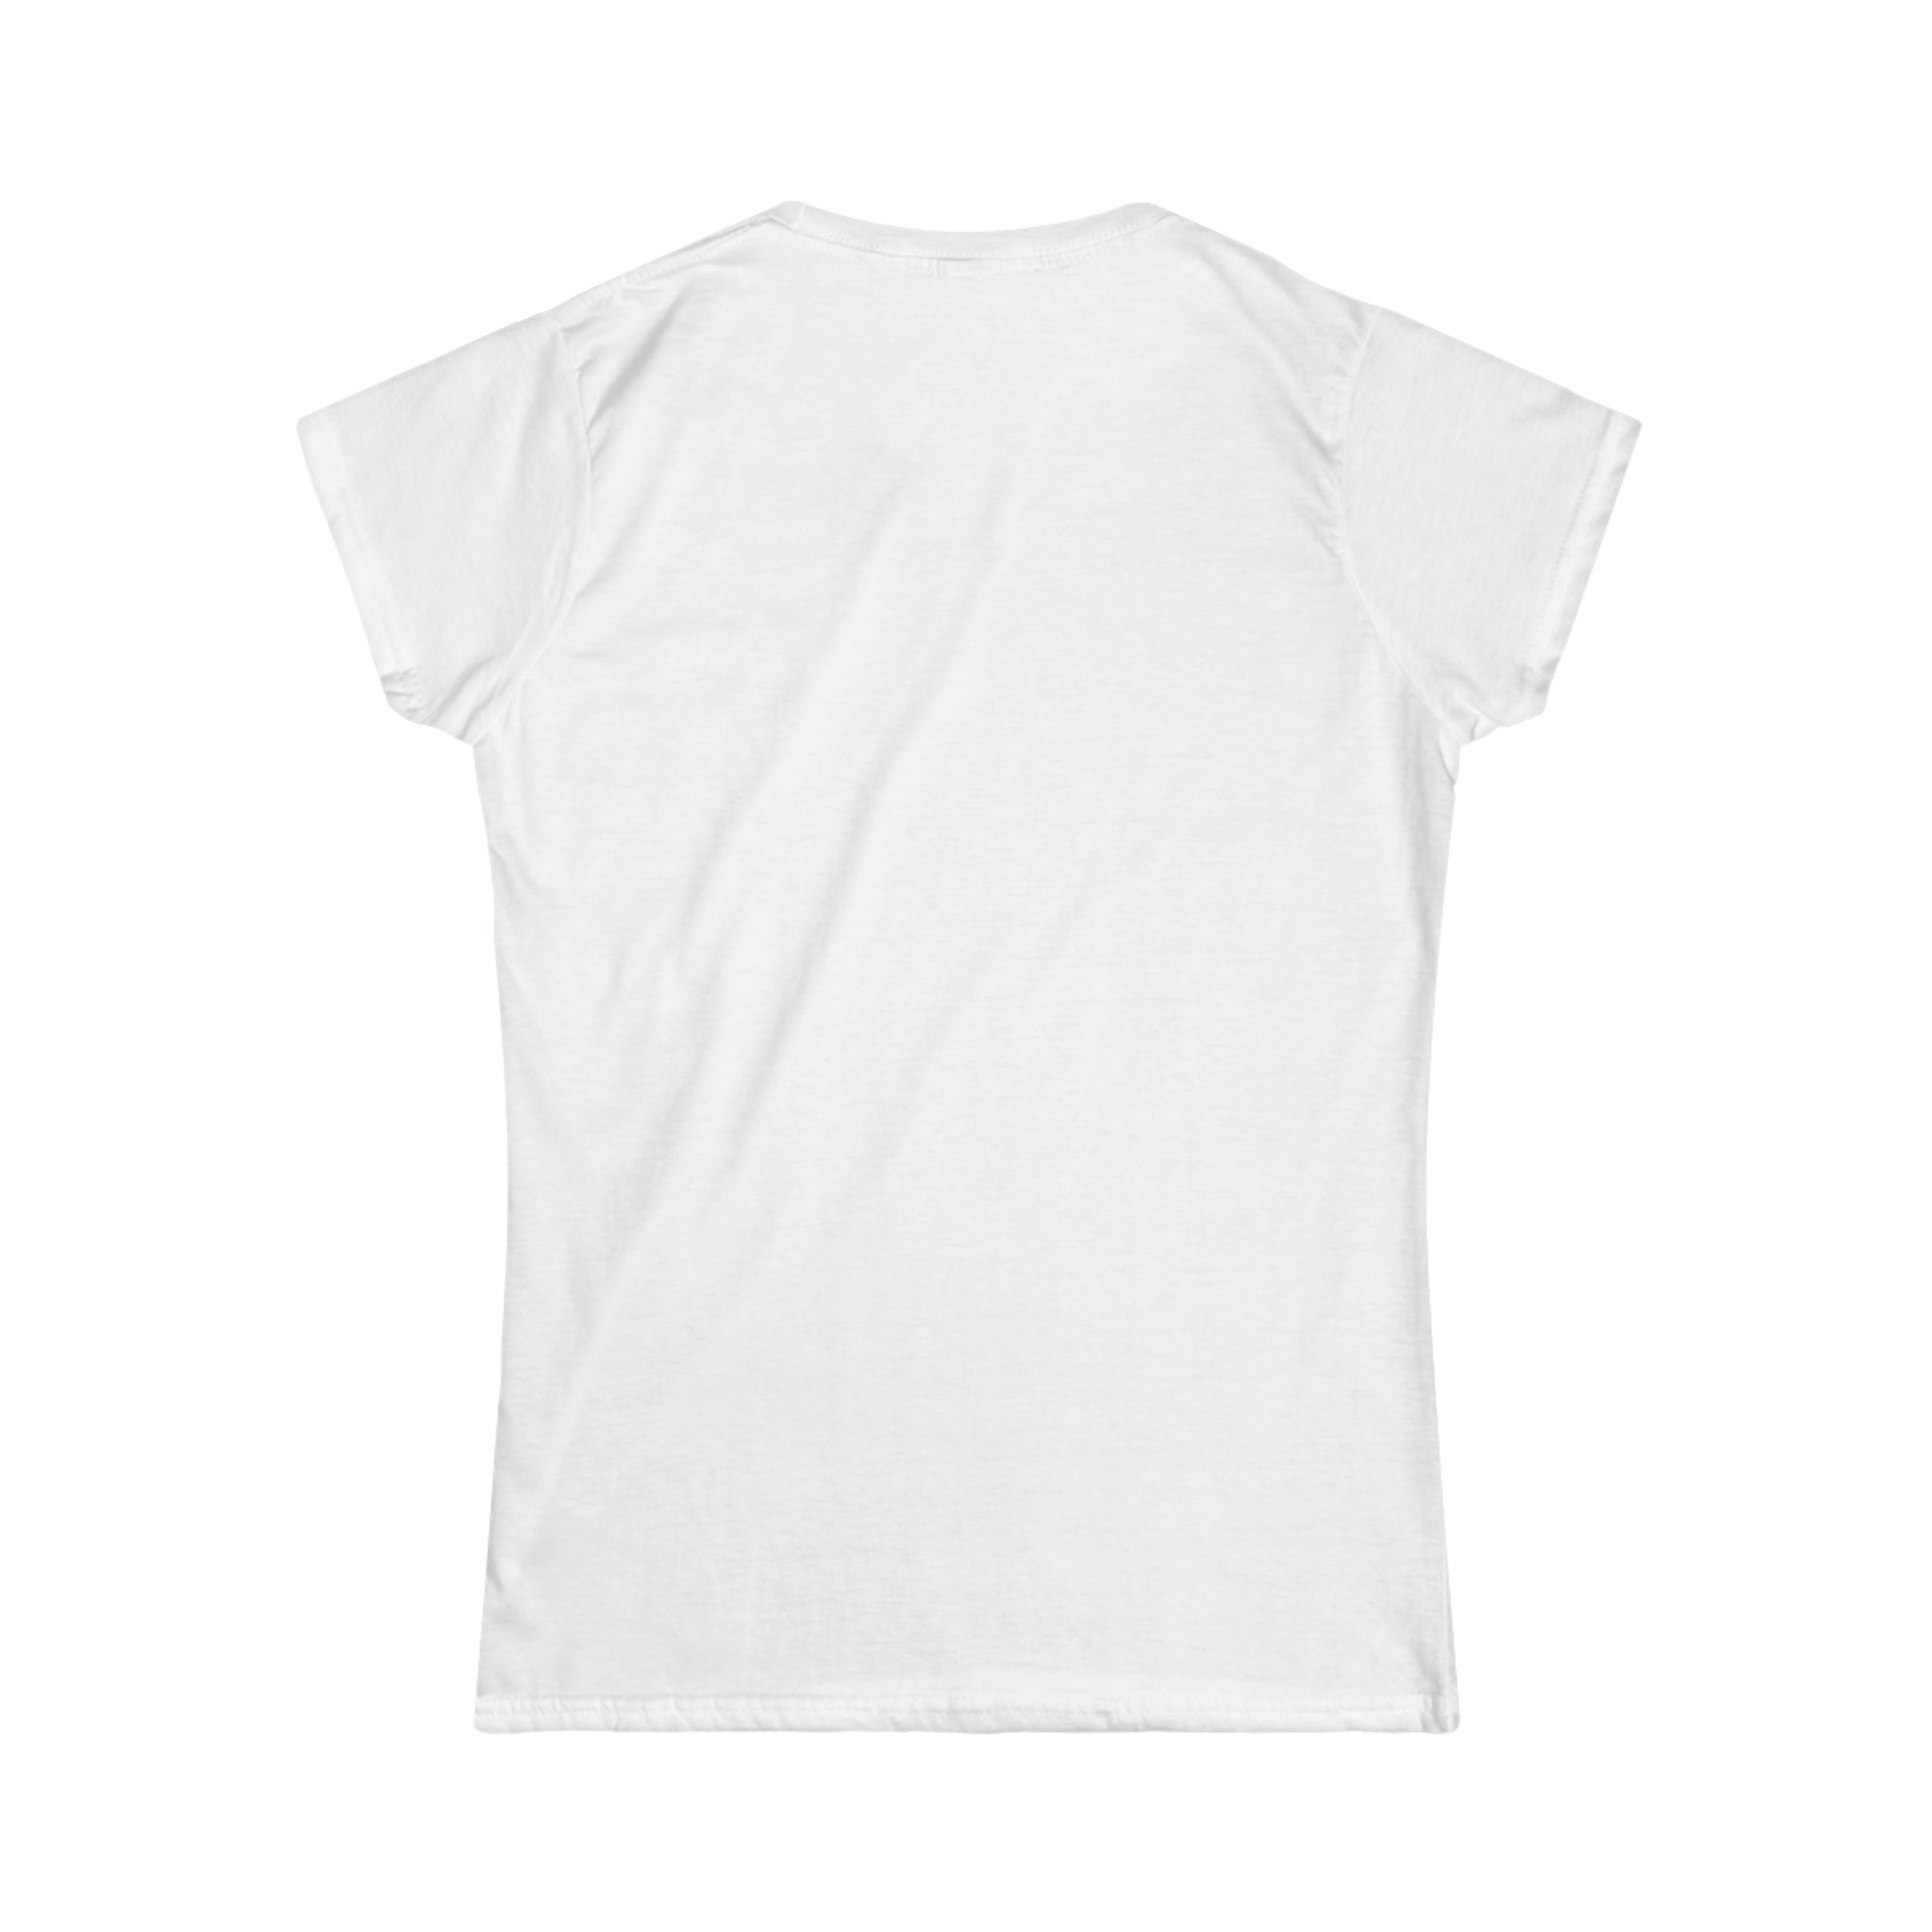 Copy of FEDSURRECTION  WOMEN'S SOFTSTYLE  TEE